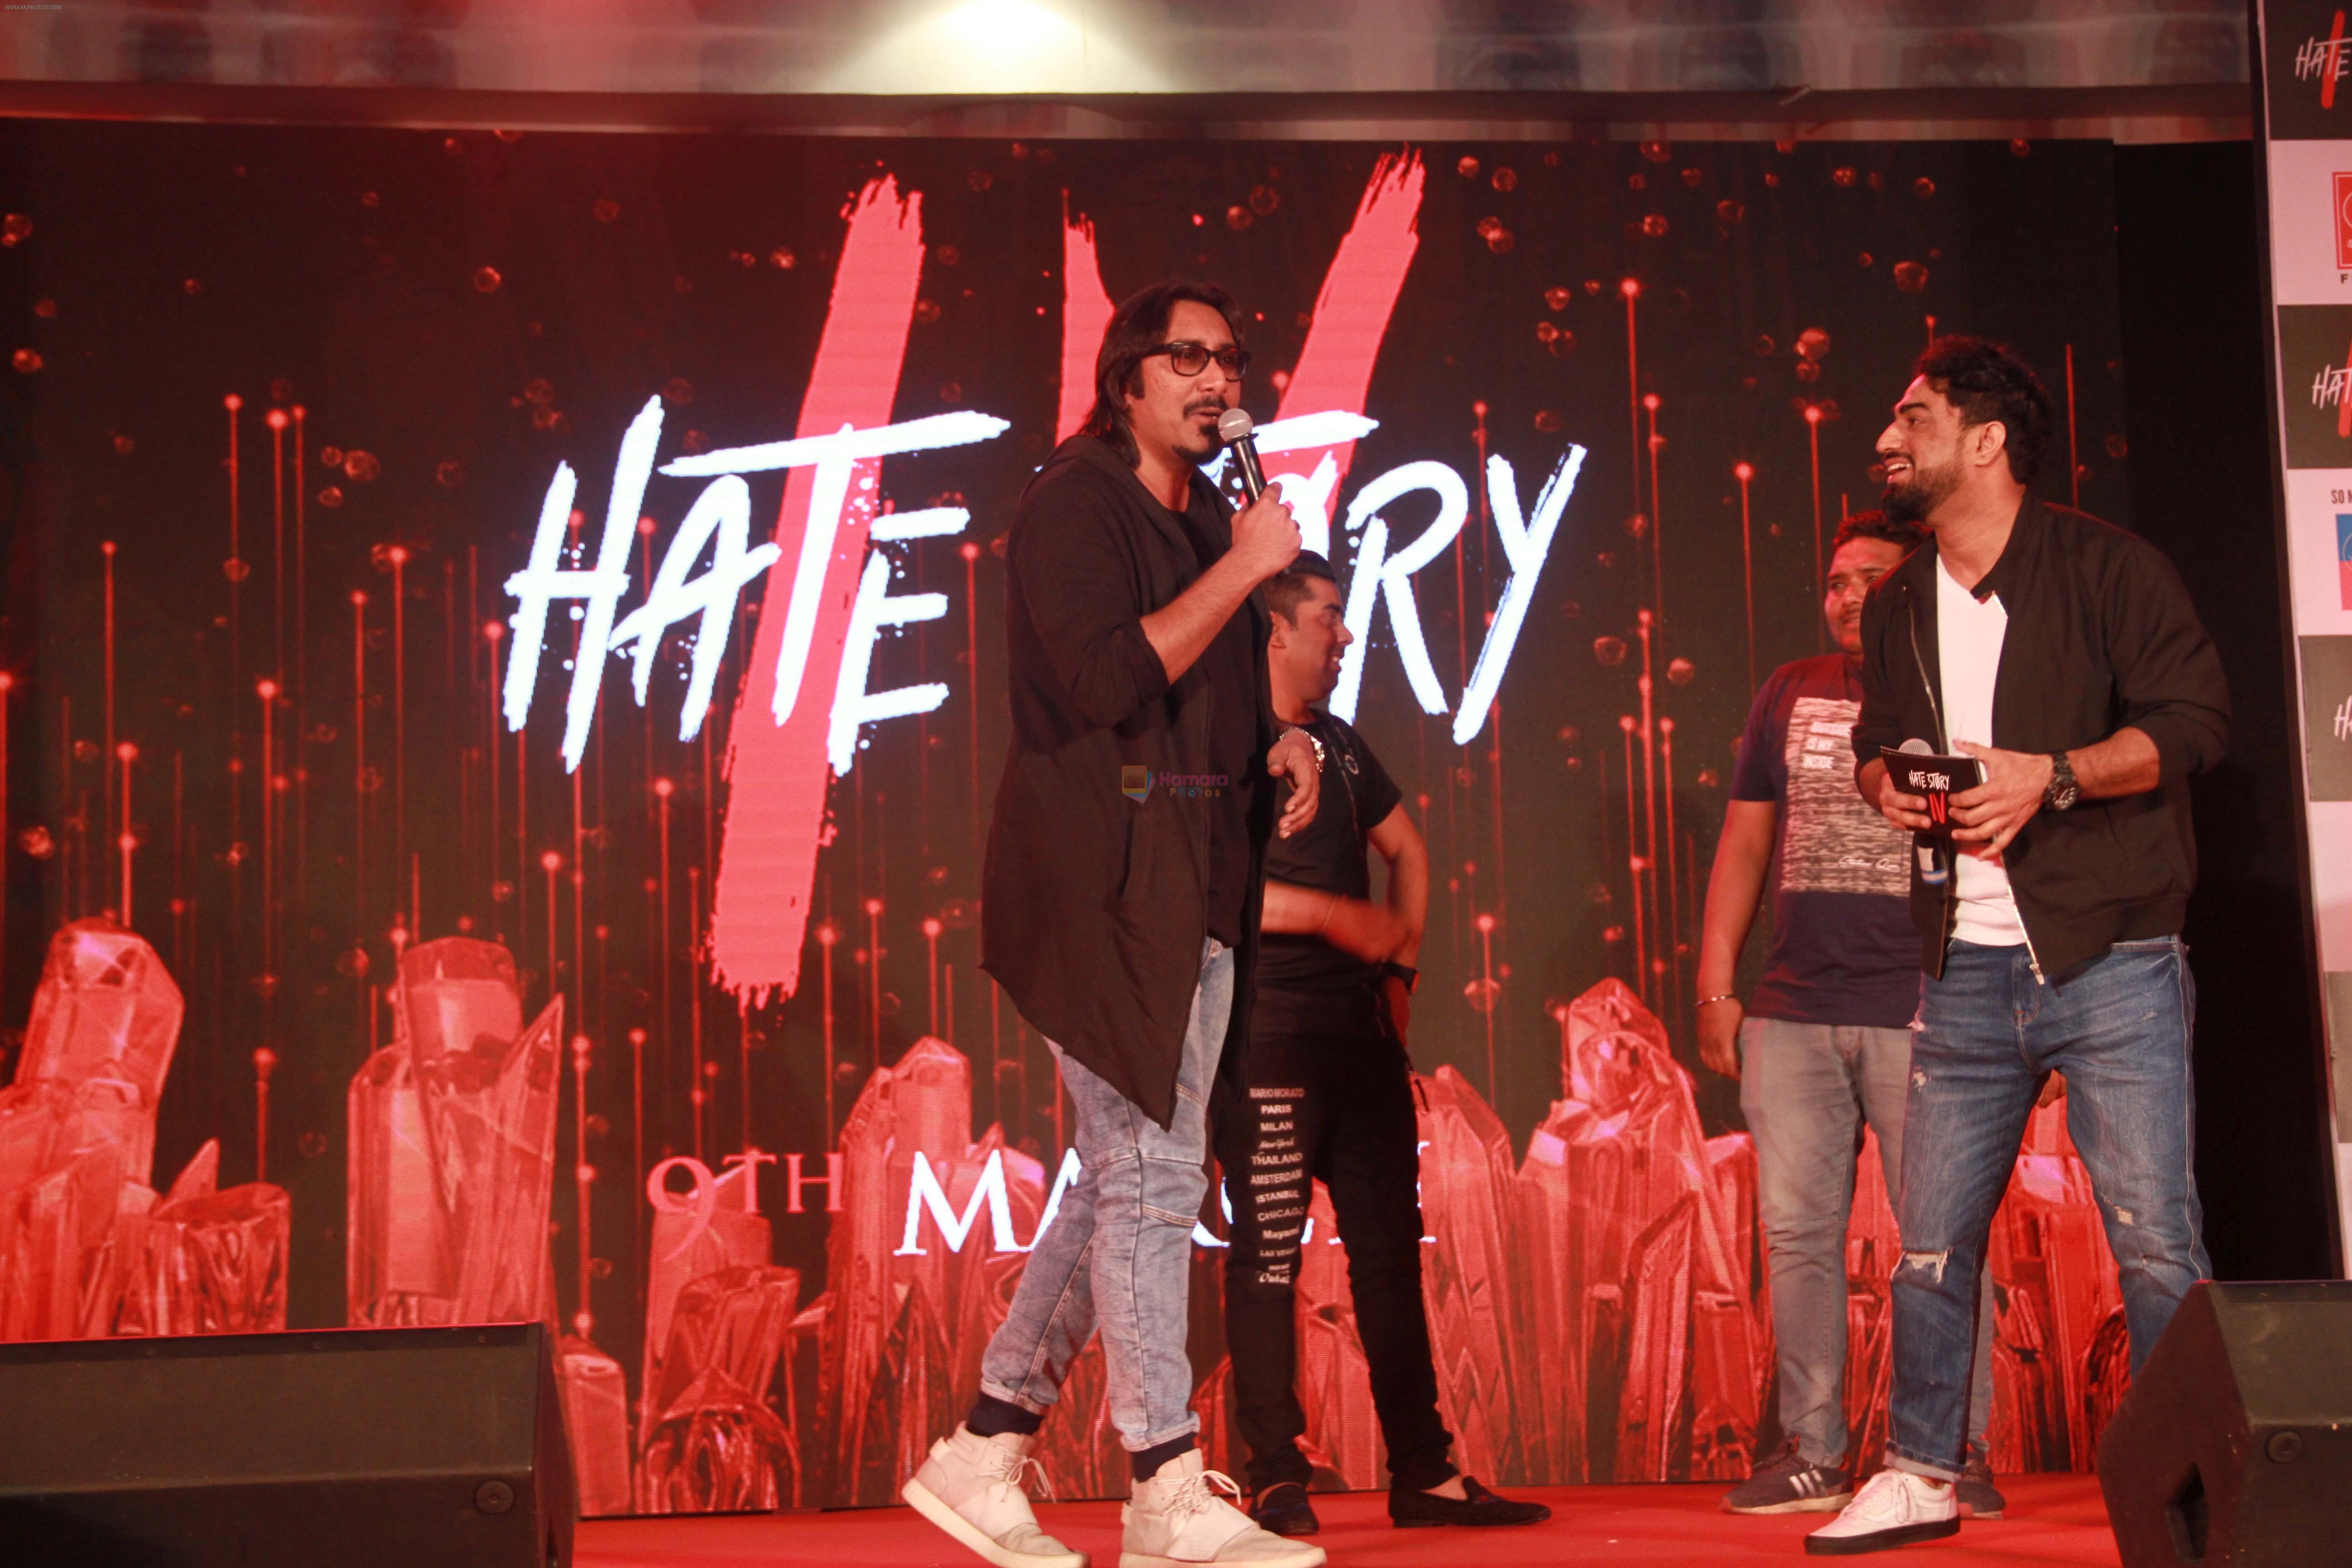 at Hate story 4 music concert at R city mall ghatkopar, mumbai on 4th March 2018